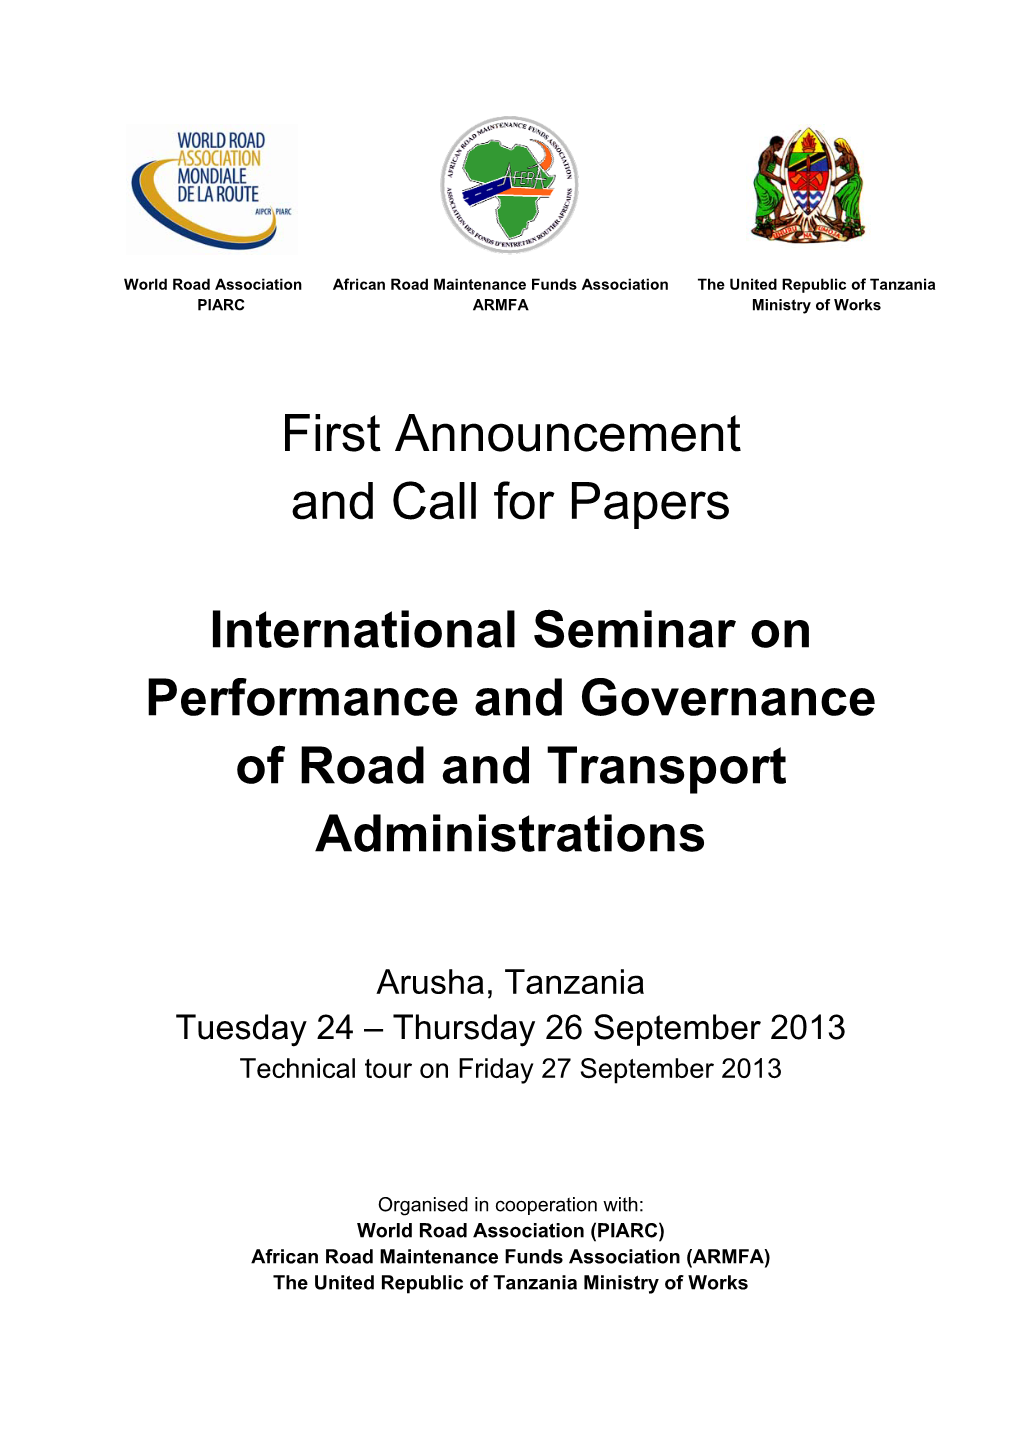 First Announcement and Call for Papers International Seminar On